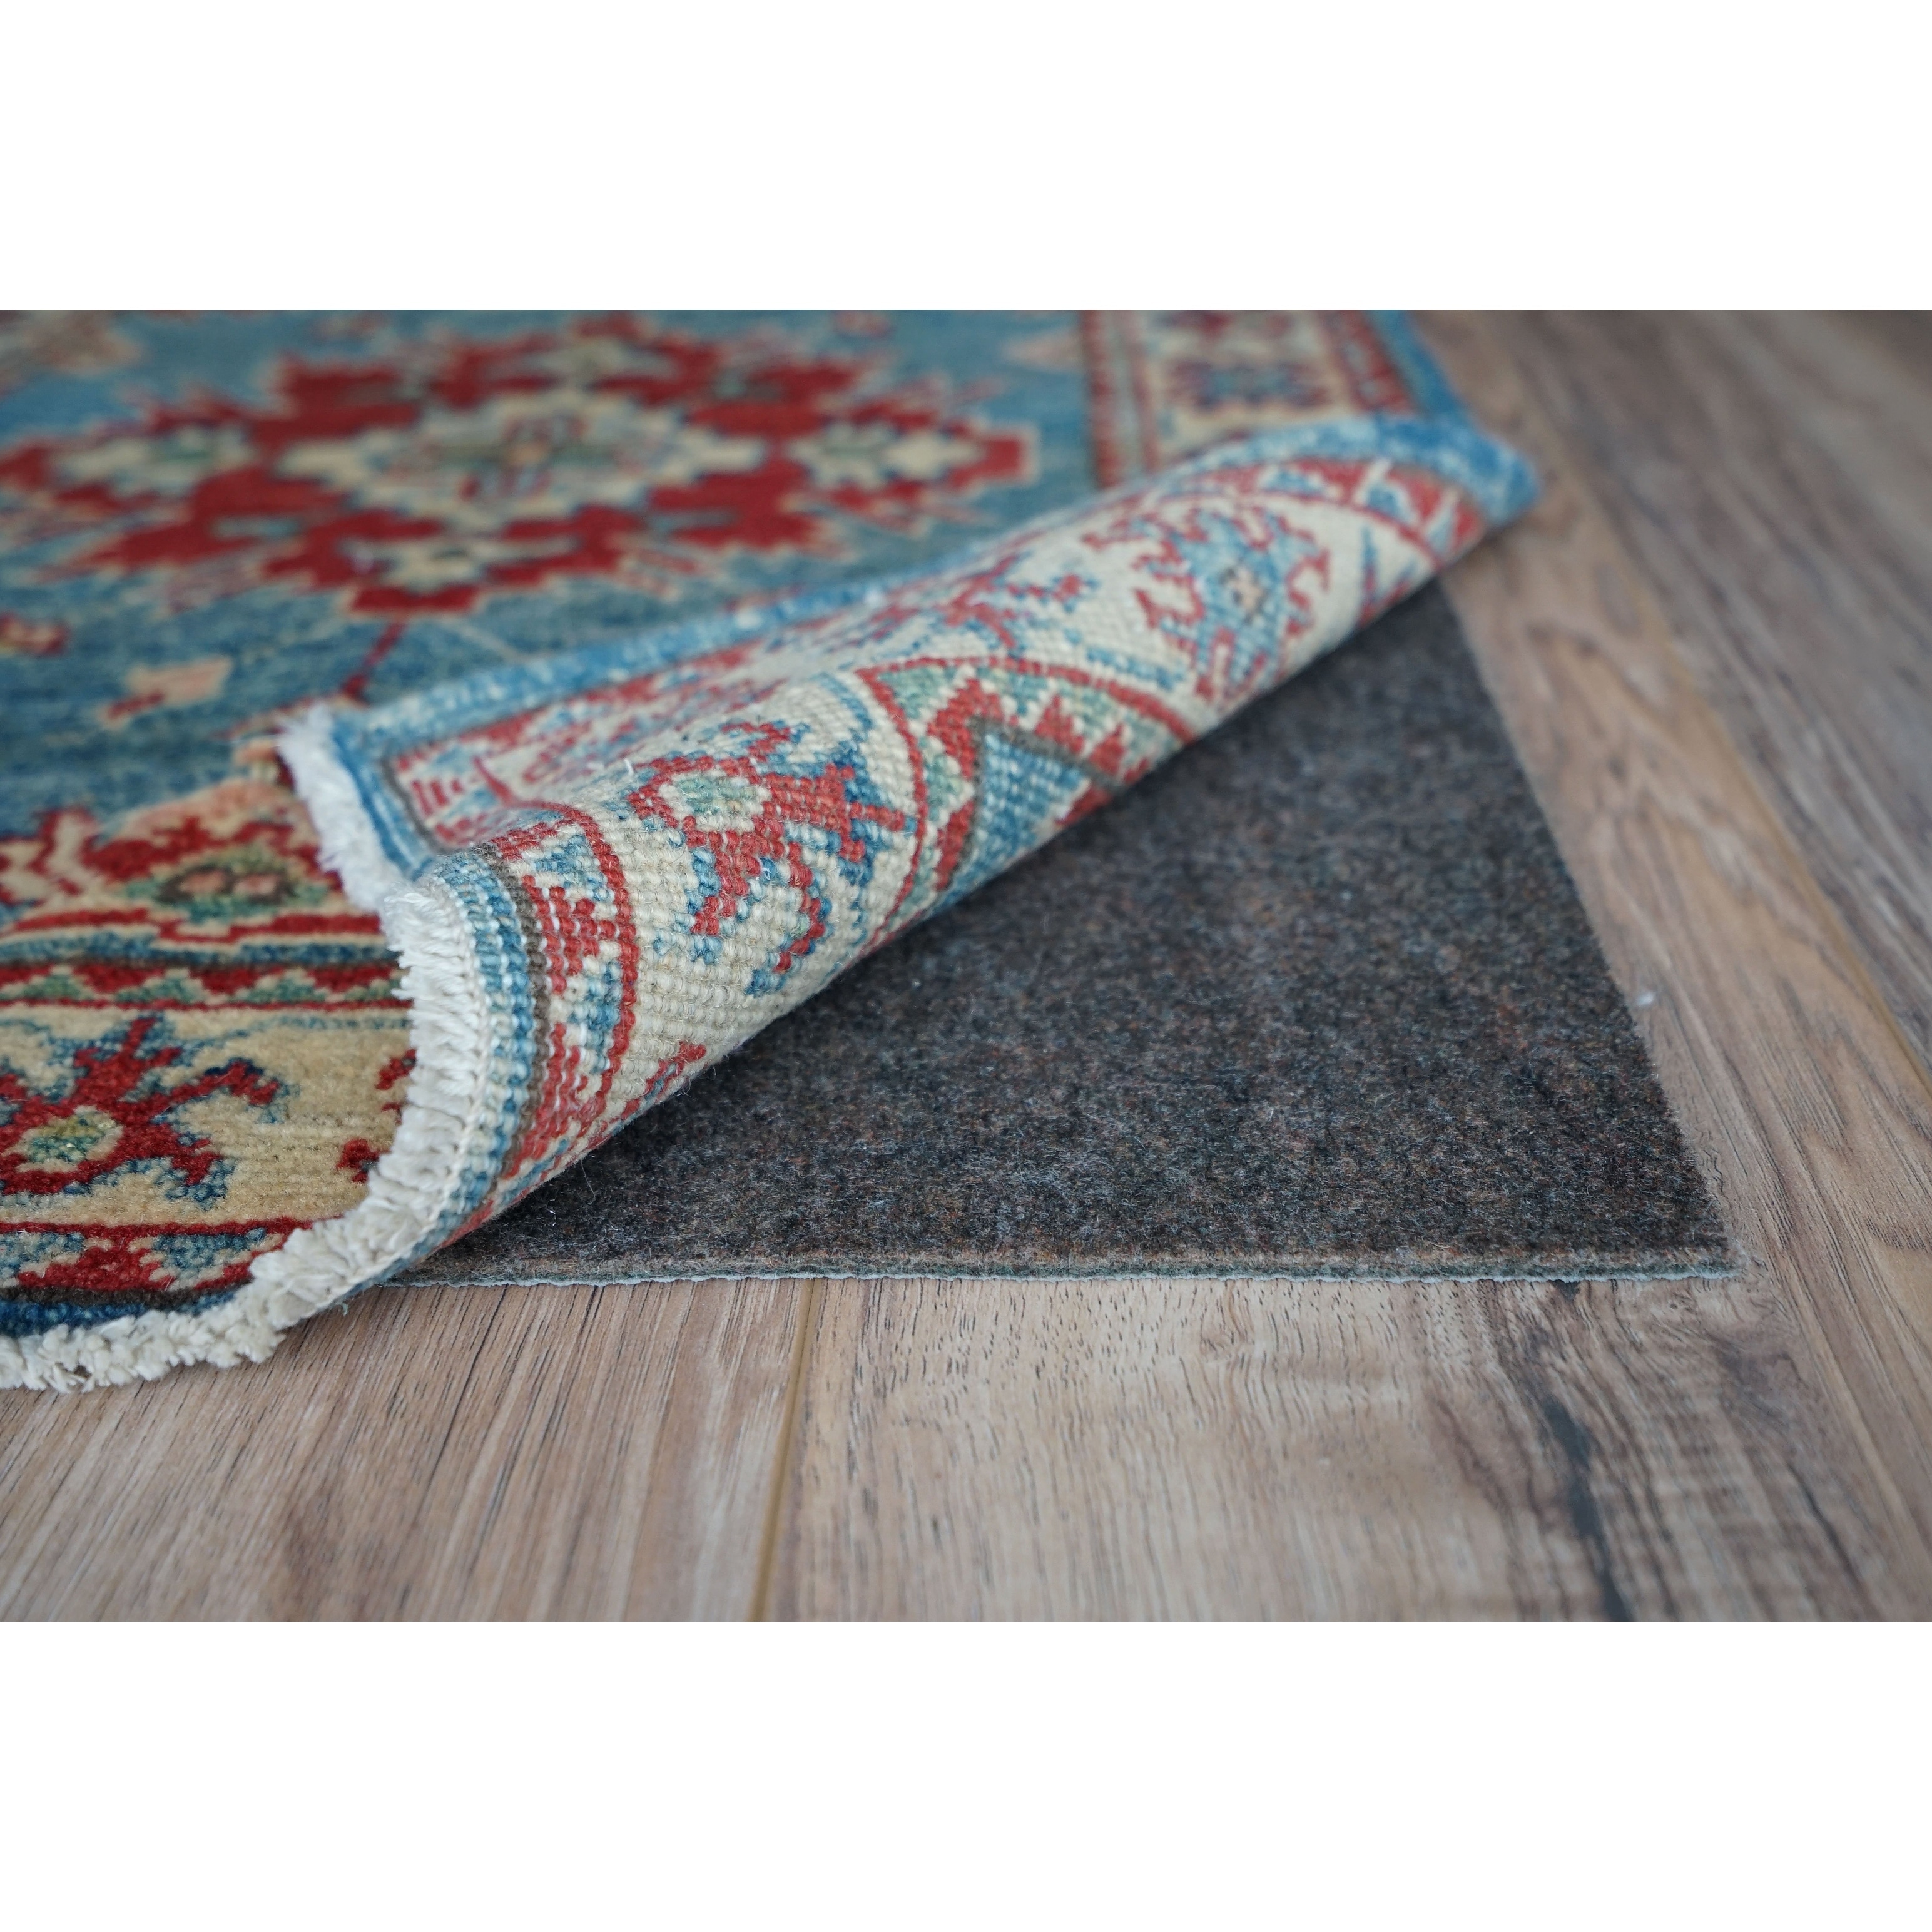 Mohawk Home 6' x 9' Non Slip Rug Pad Gripper 3/8 Thick Dual Surface Felt + Rubber Gripper - Safe for All Floors